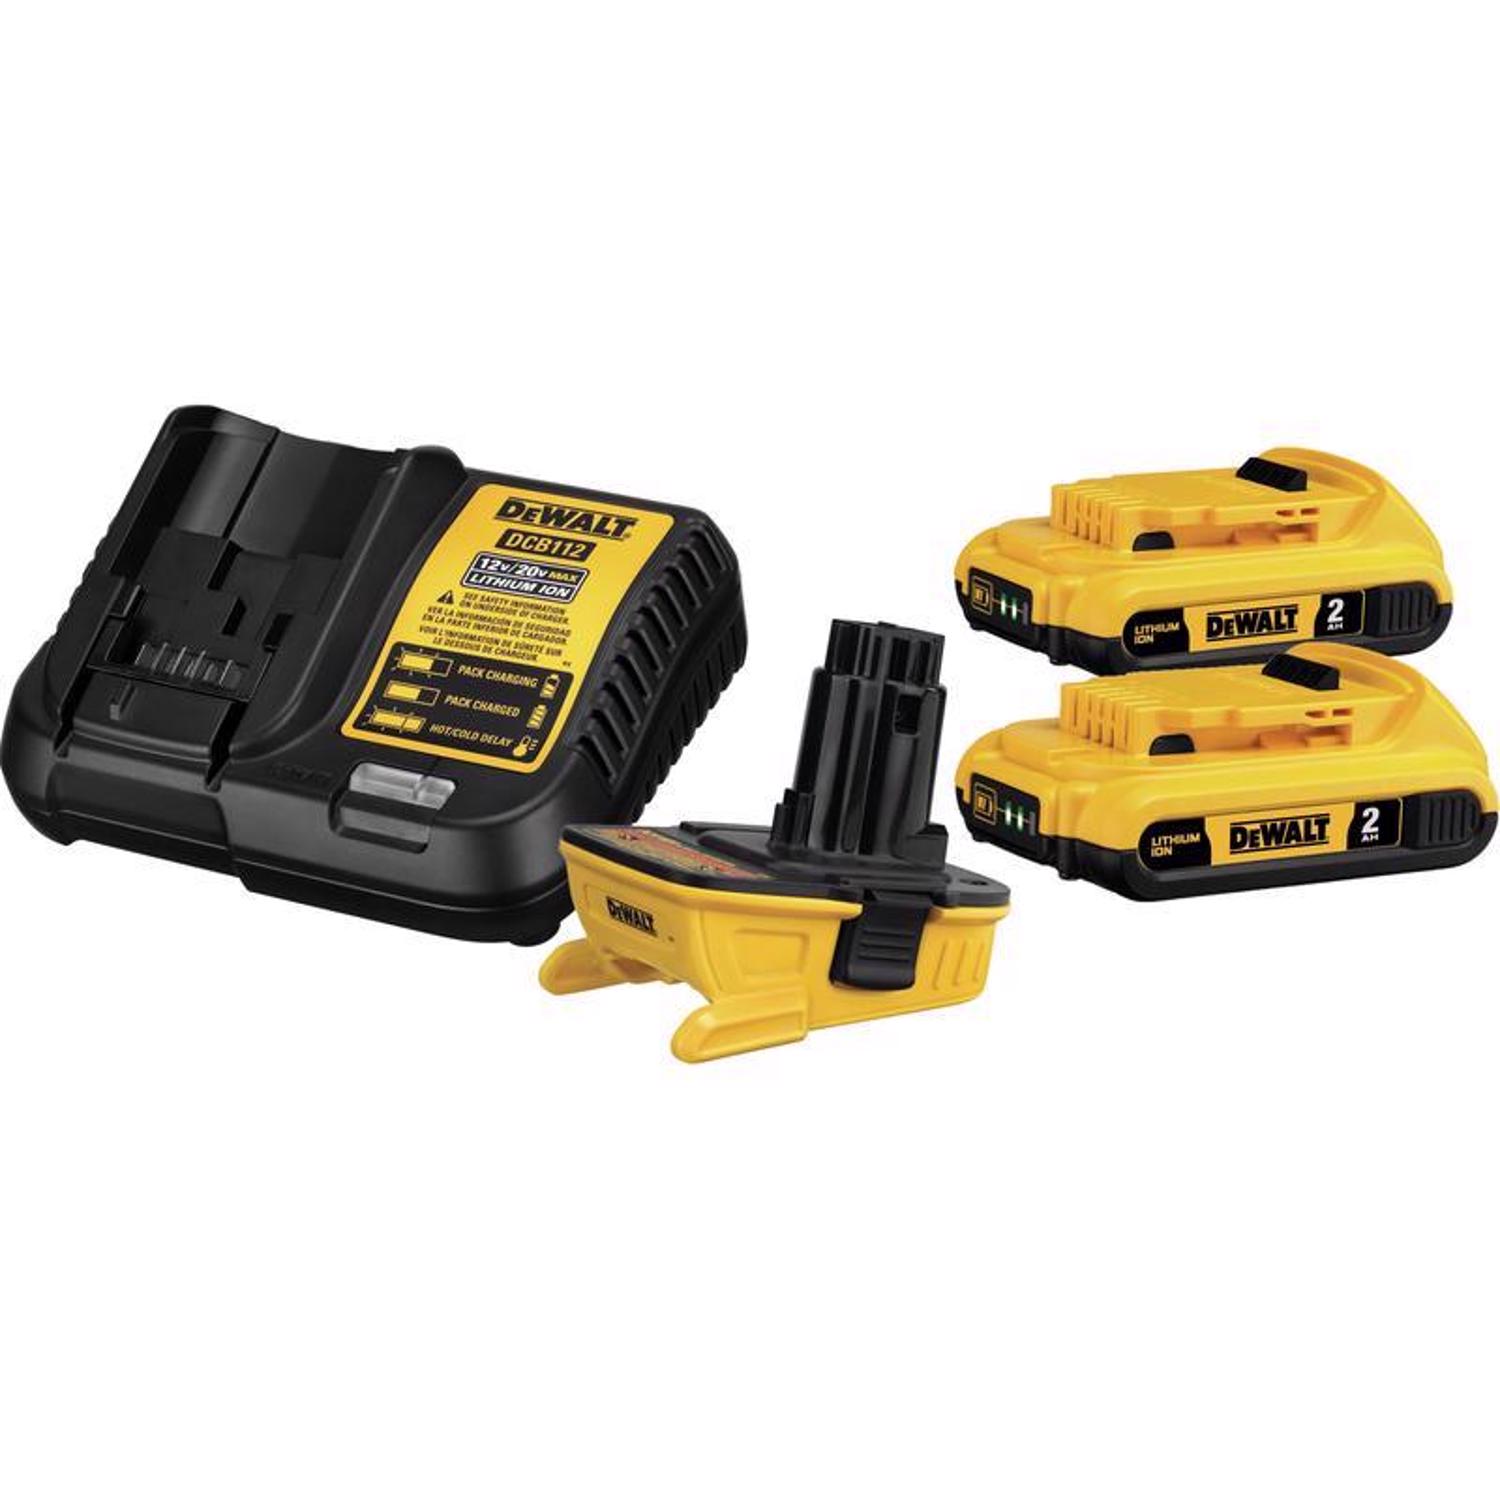 Photos - Battery Charger DeWALT 20V MAX DCA2203C Lithium-Ion Battery Adapter Kit 4 pc 